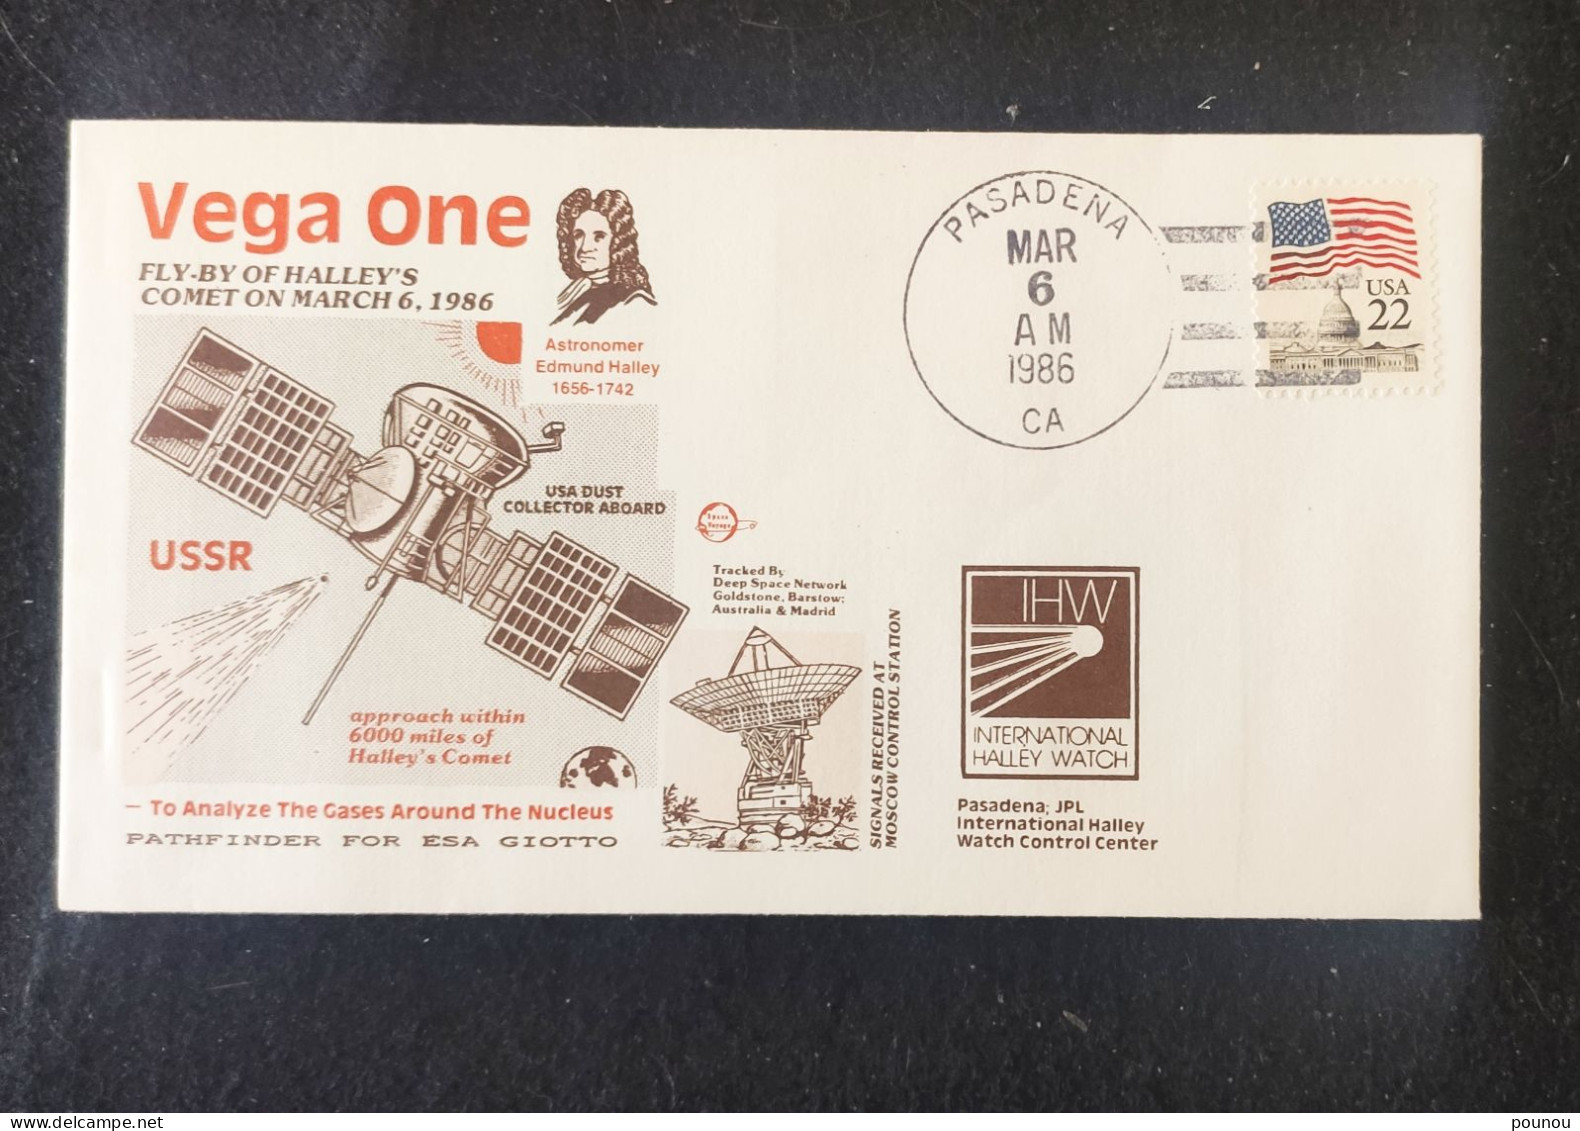 * US - VEGA ONE - FLY-BY OF HALLEY'S COMET 1986 (17) - USA